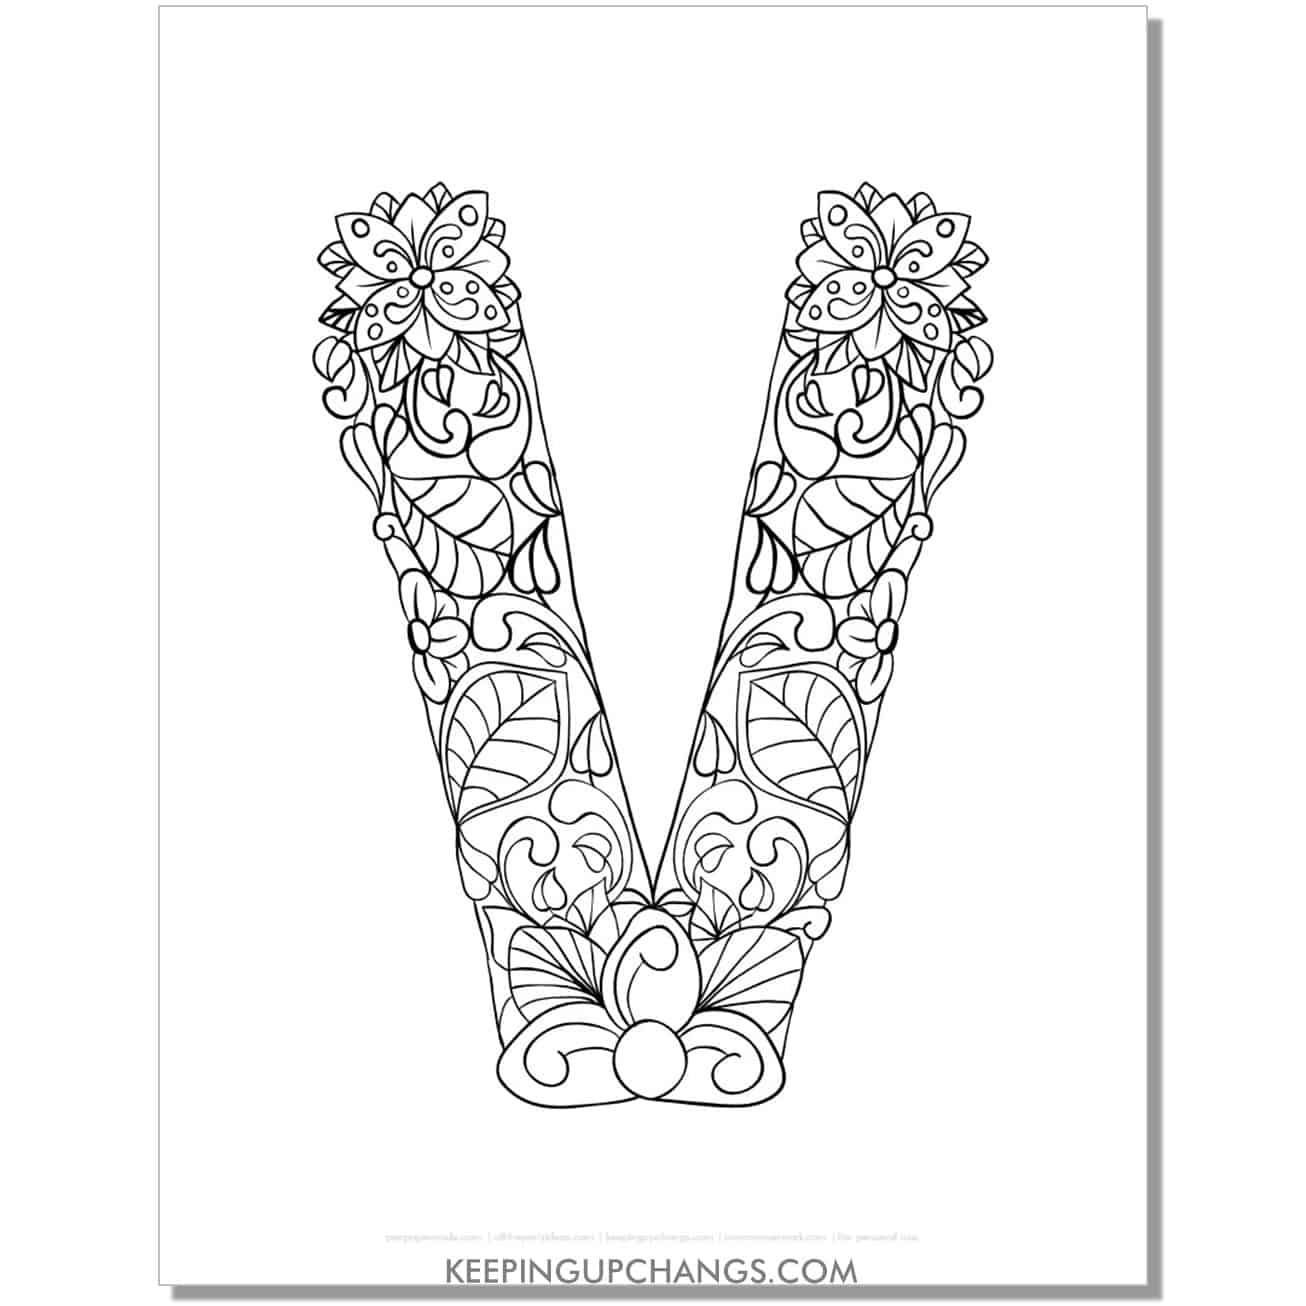 free abc v to color, complicated mandala zentangle for adults.